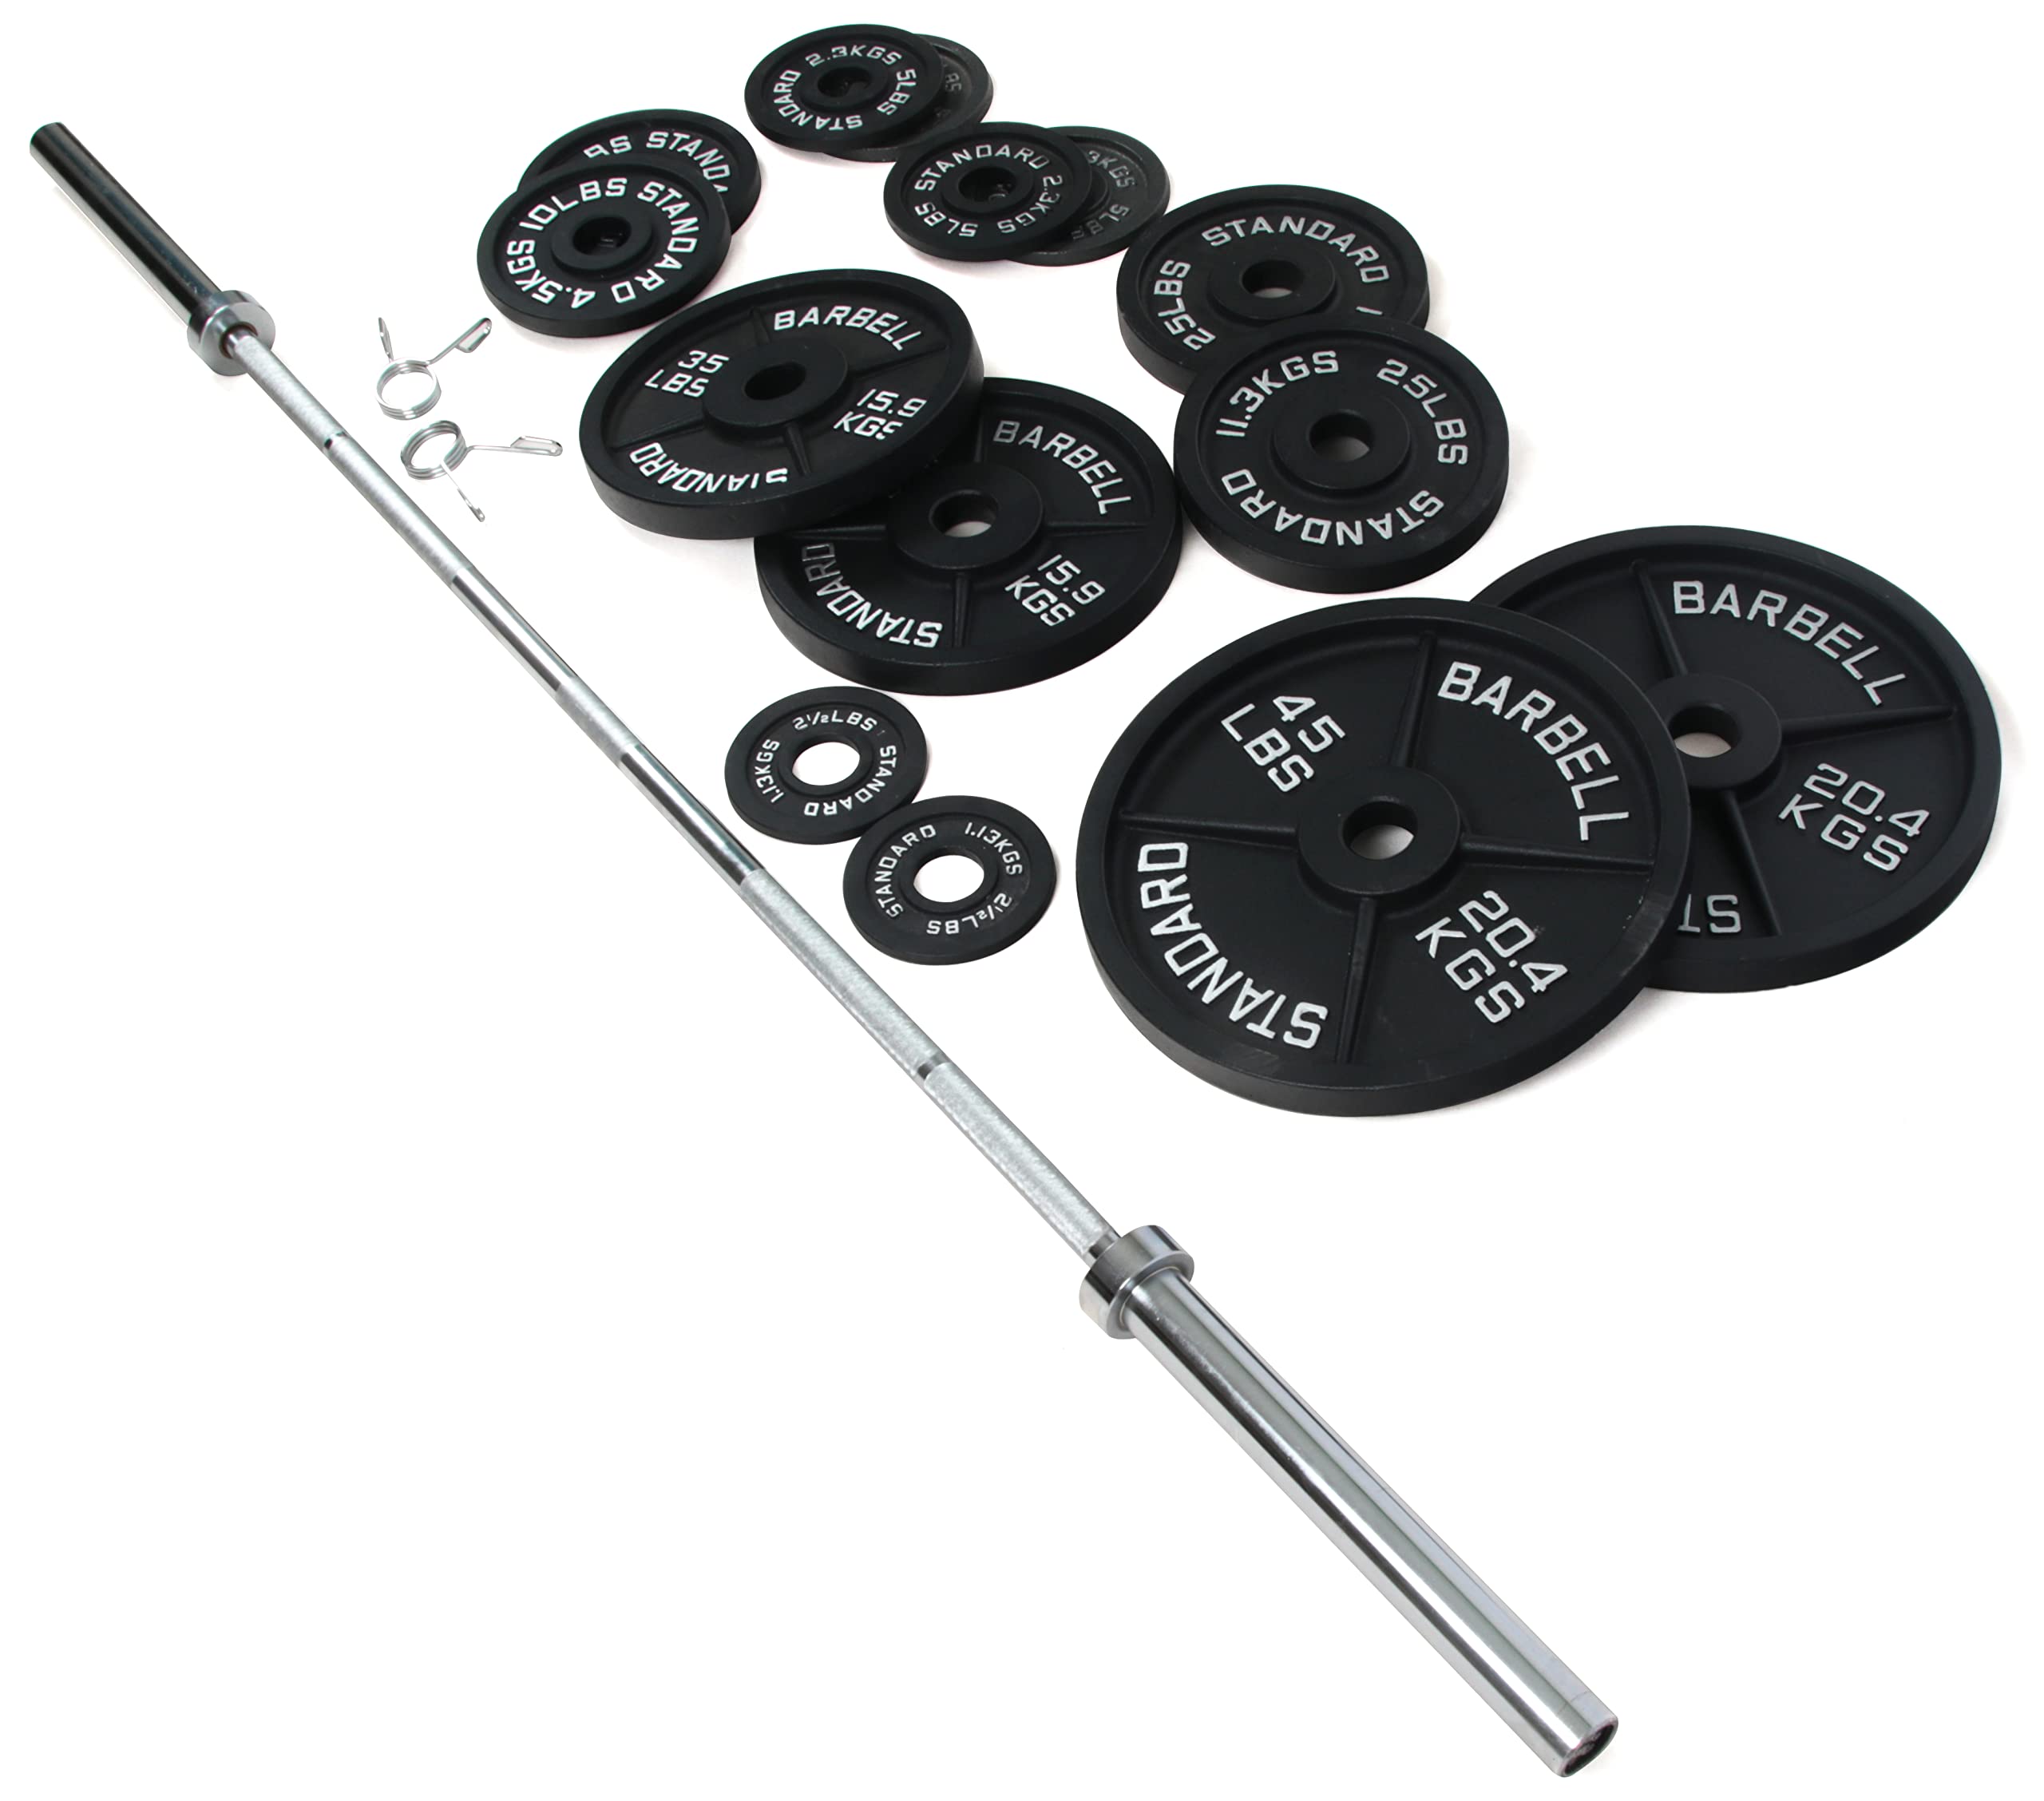 Signature Fitness Cast Iron Olympic Weight Including 7FT Olympic Barbell, 300-Pound Set, Multiple Packages